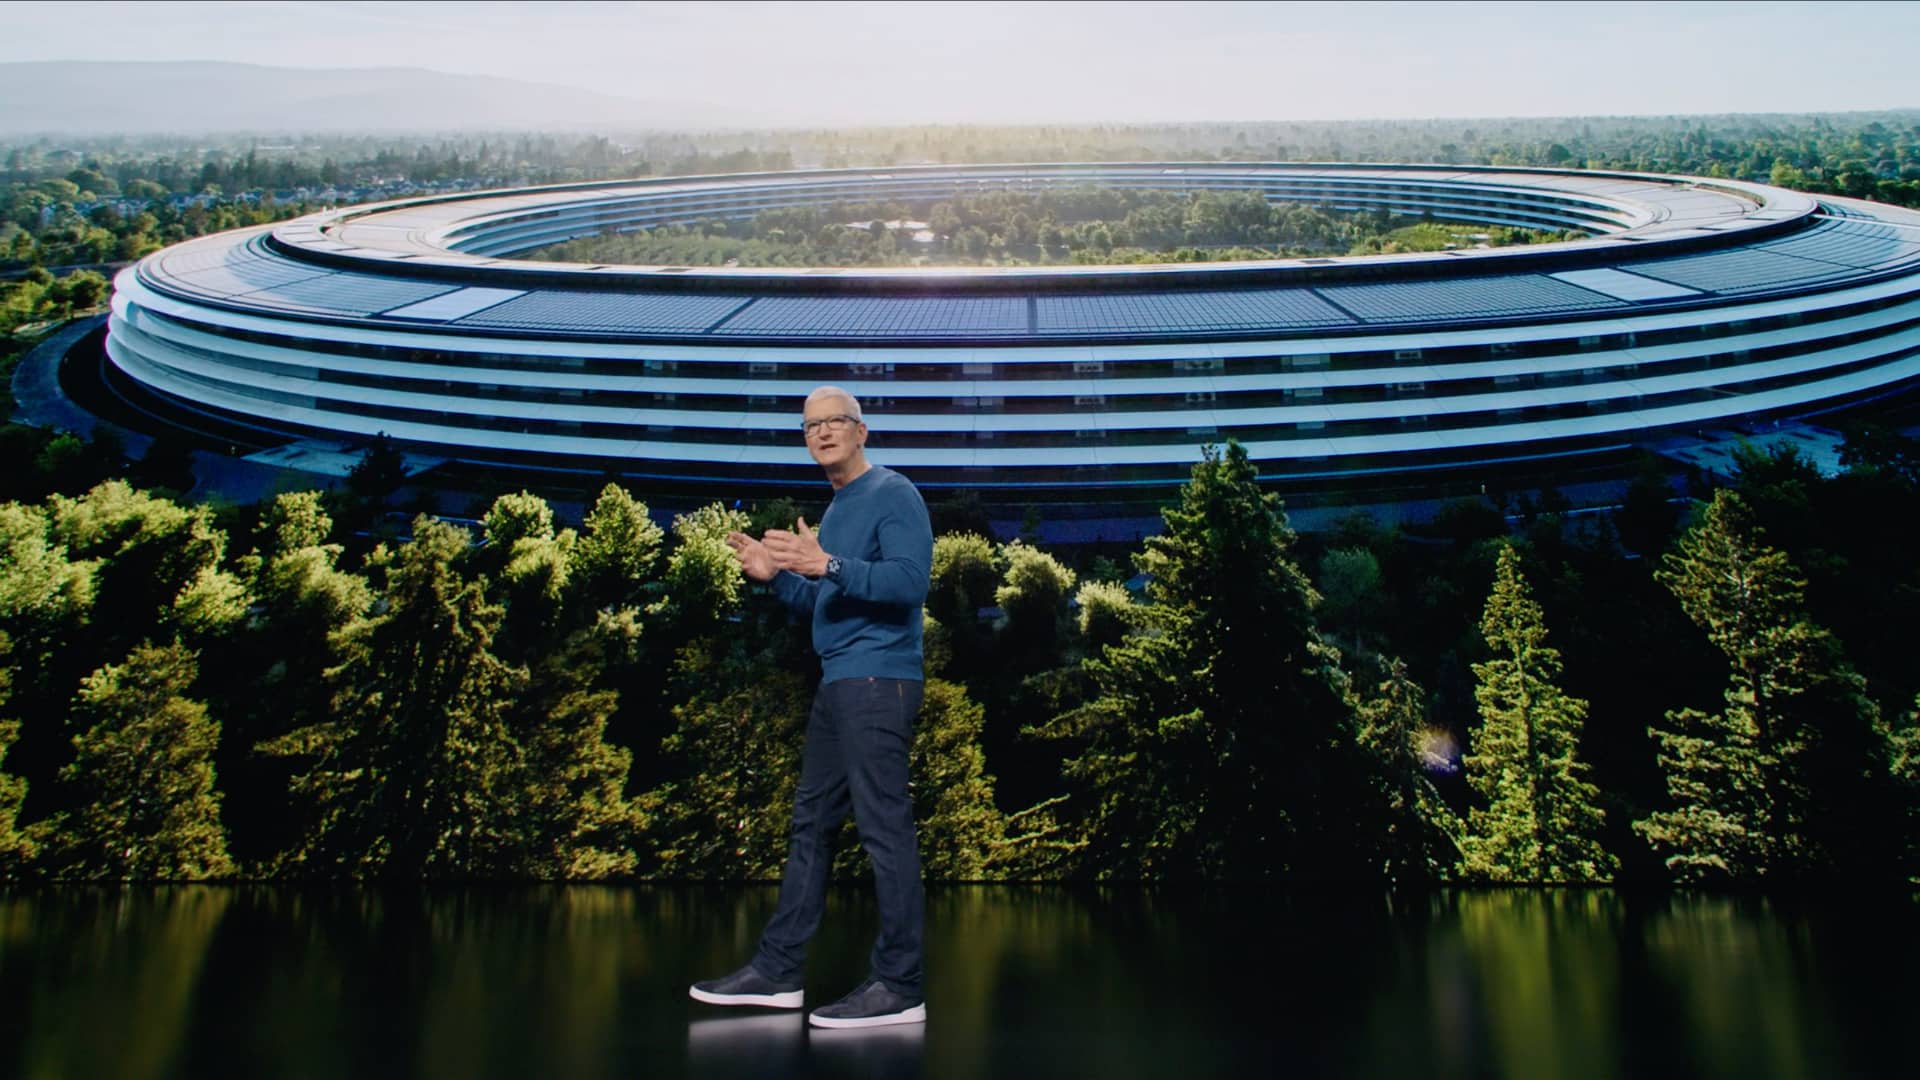 A still image from Apple's September 2021 “California Streaming” event video with CEO Tim Cook standing on stage in front of a huge keynote slide behind him that displays an aerial view of the Apple Park headquarters while Cook is talking enthusiastically and gesturing with his hands